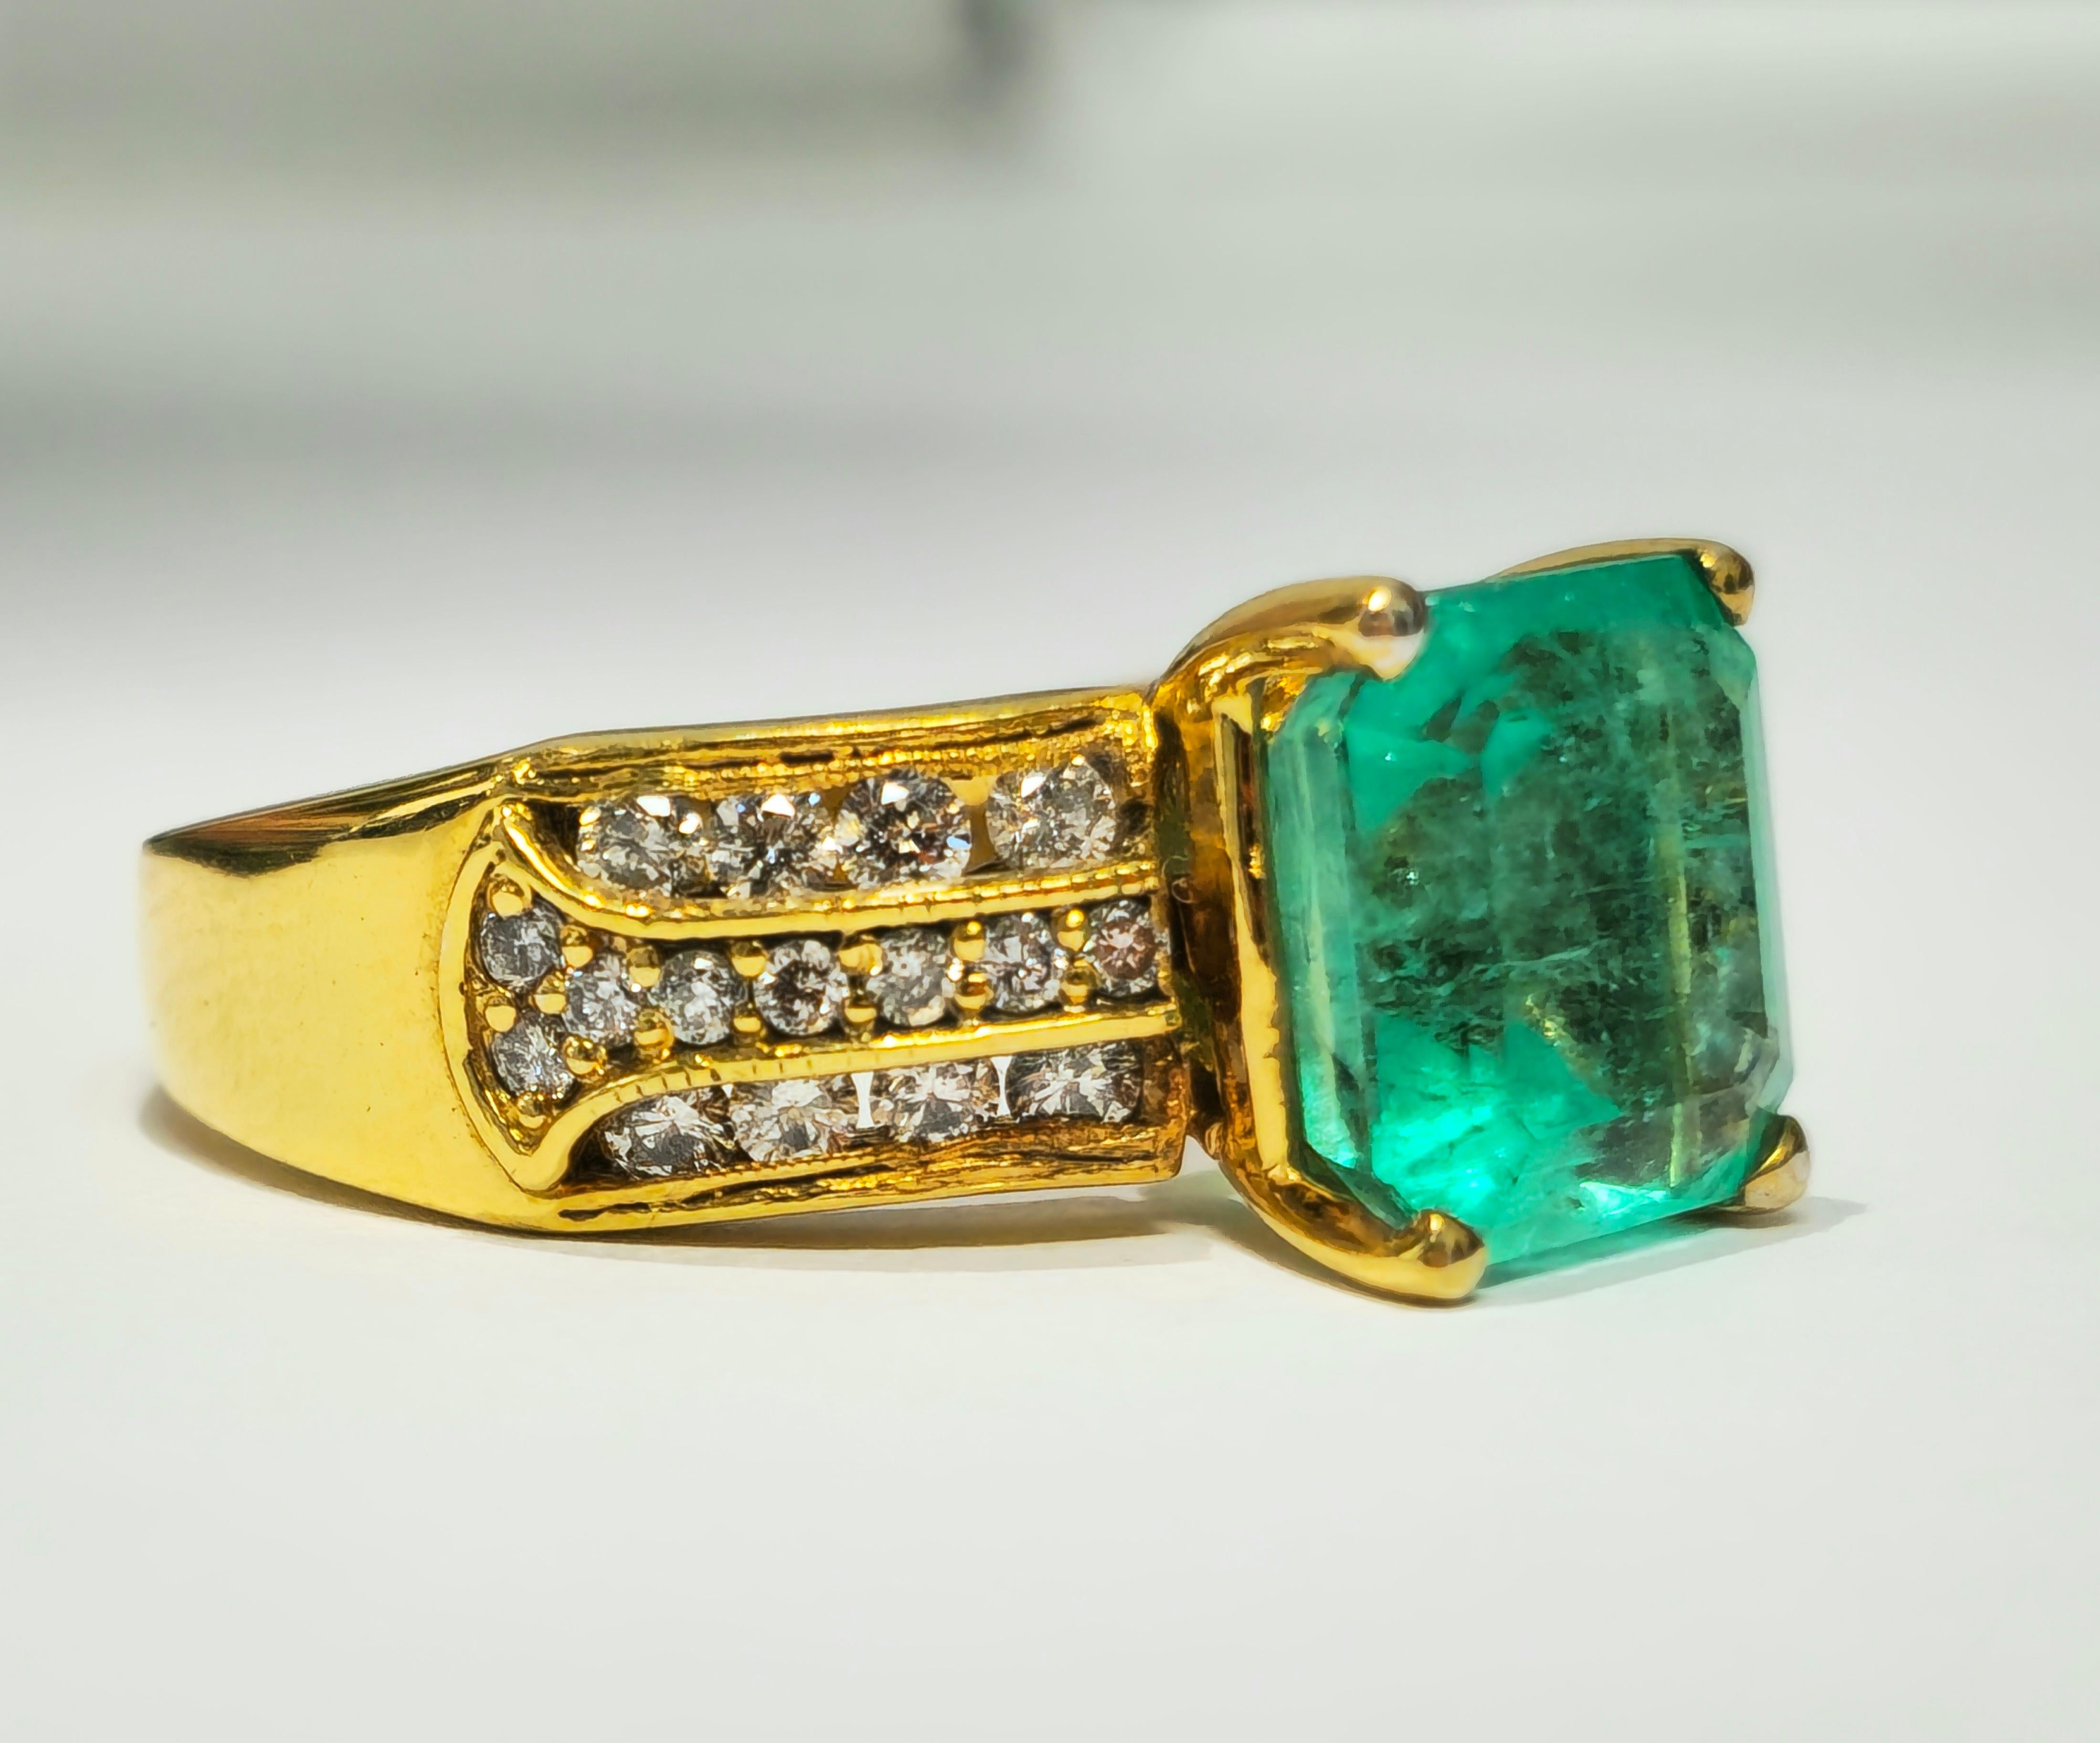 Embrace elegance with our stunning Emerald and Diamond Ring, crafted from radiant yellow gold. Featuring a breathtaking Colombian emerald with a gorgeous hue and intense green color, this ring exudes natural beauty and sophistication. Adorned with